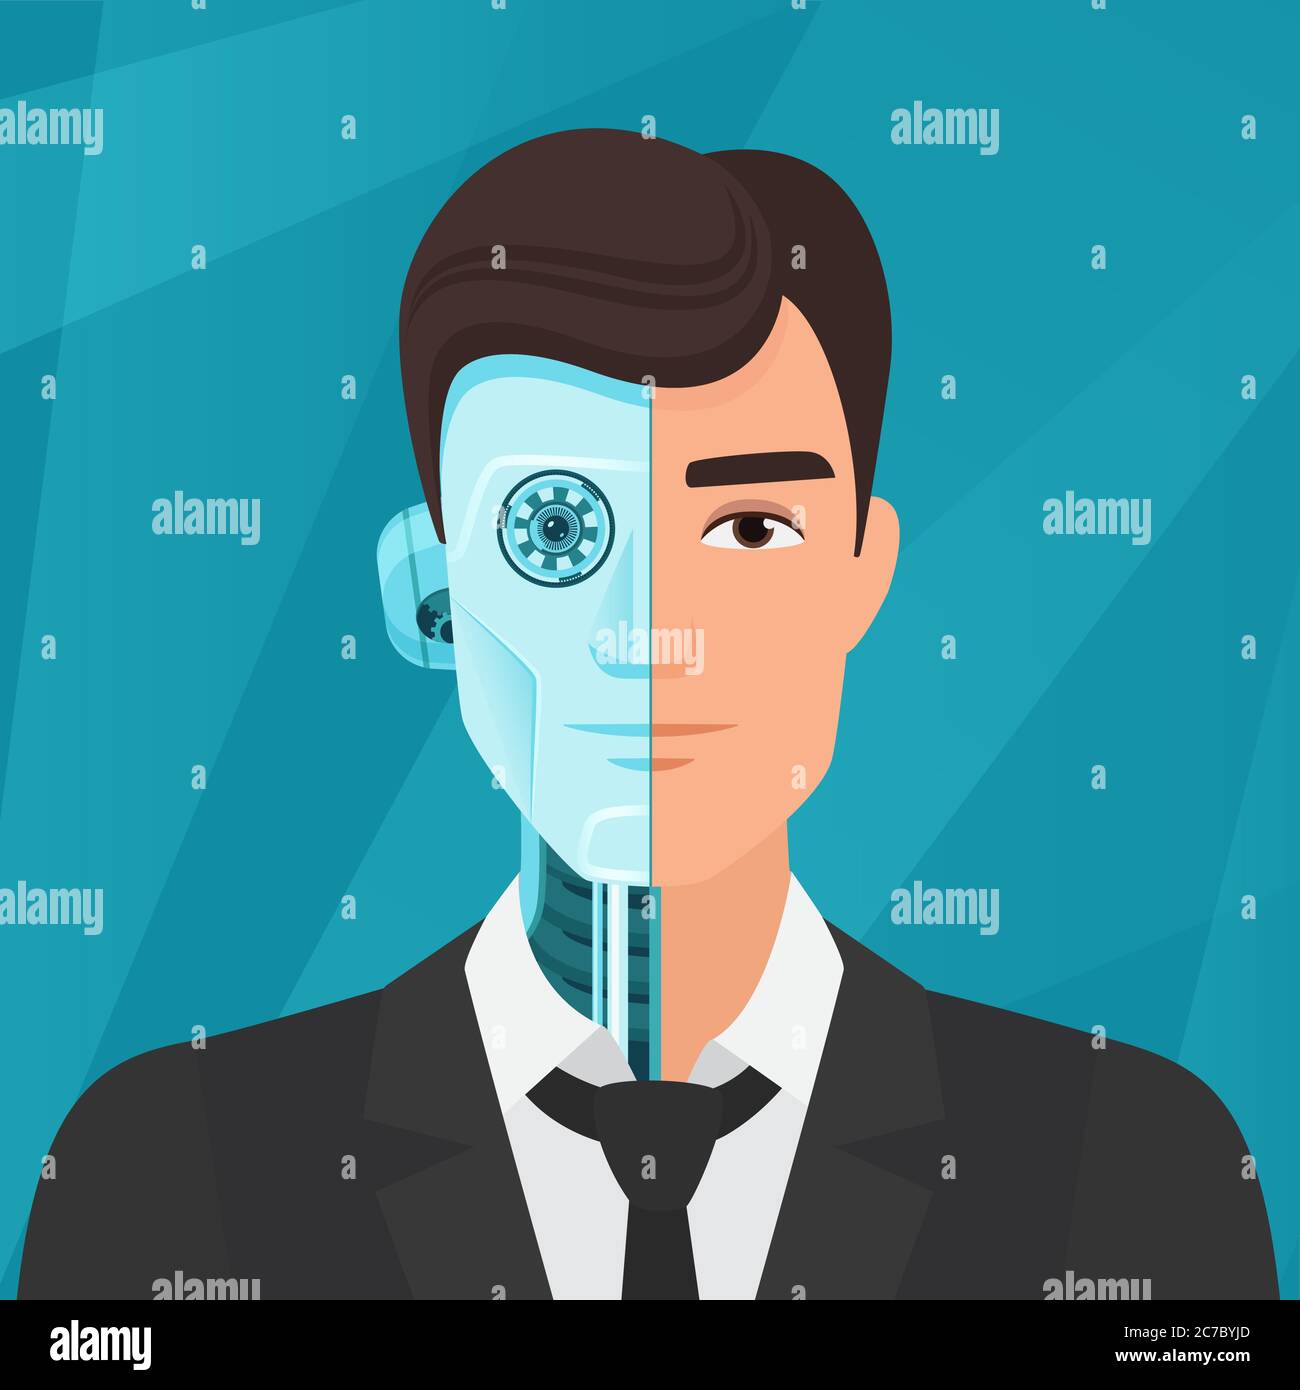 Robot head clipart Stock Vector Images - Alamy